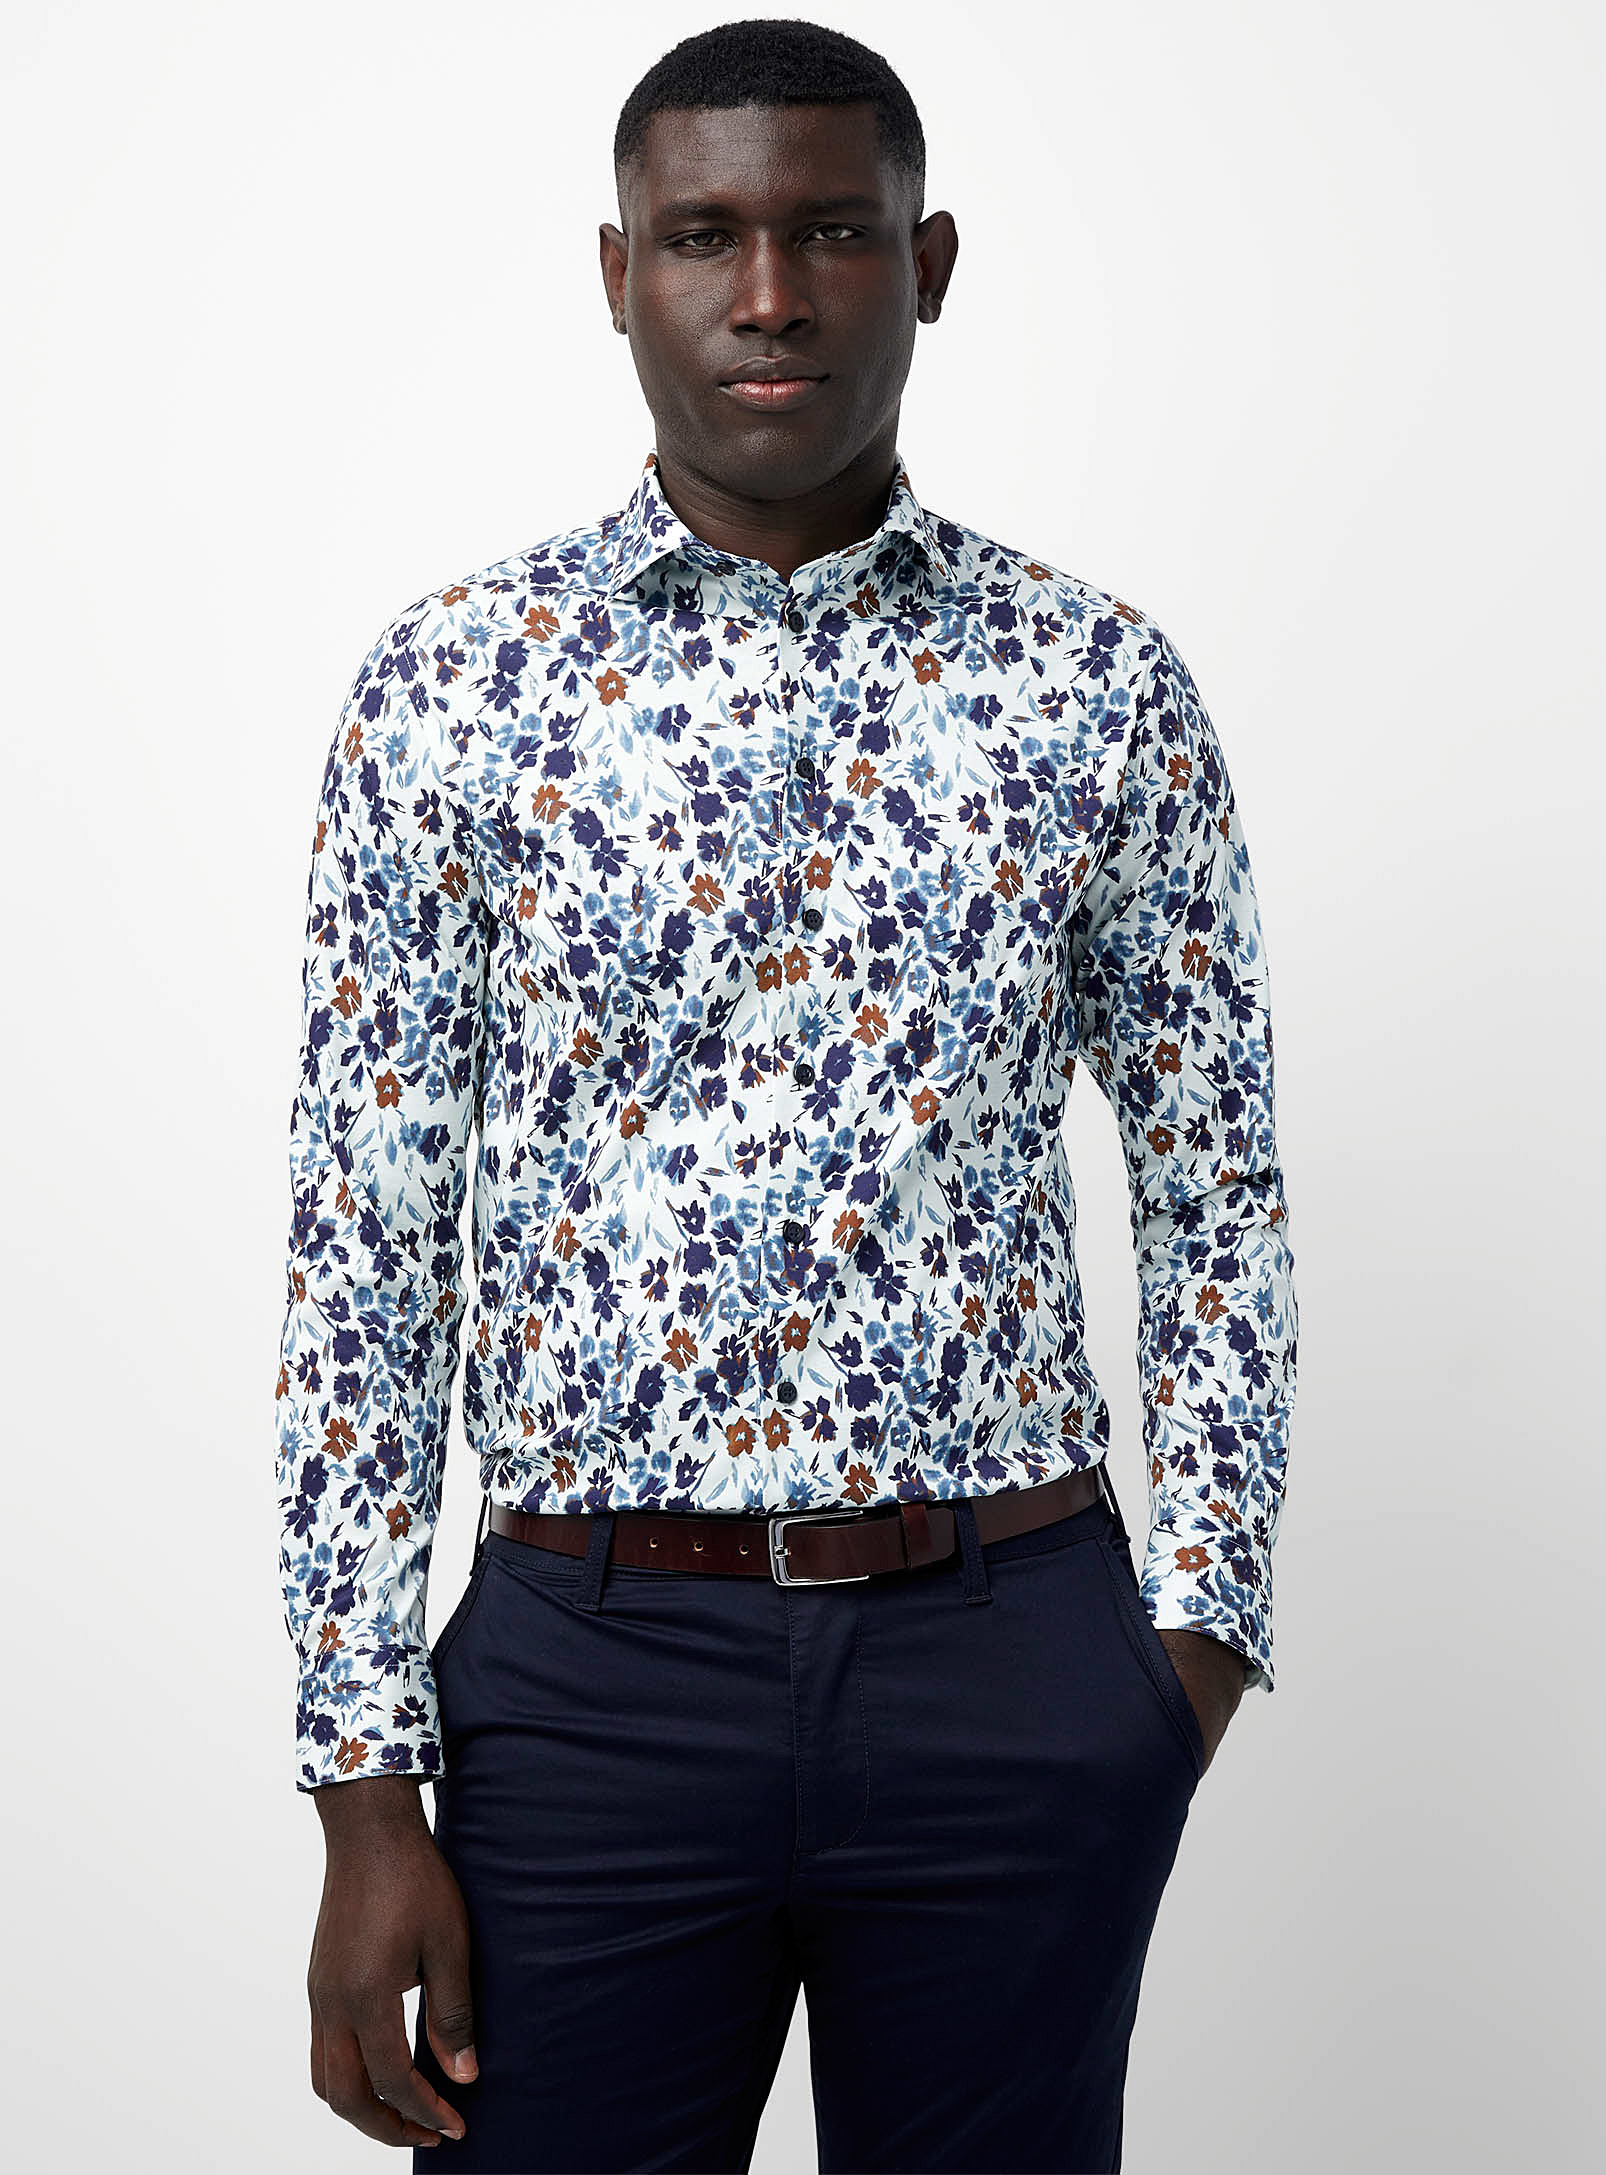 Matinique - Men's Abstract floral shirt